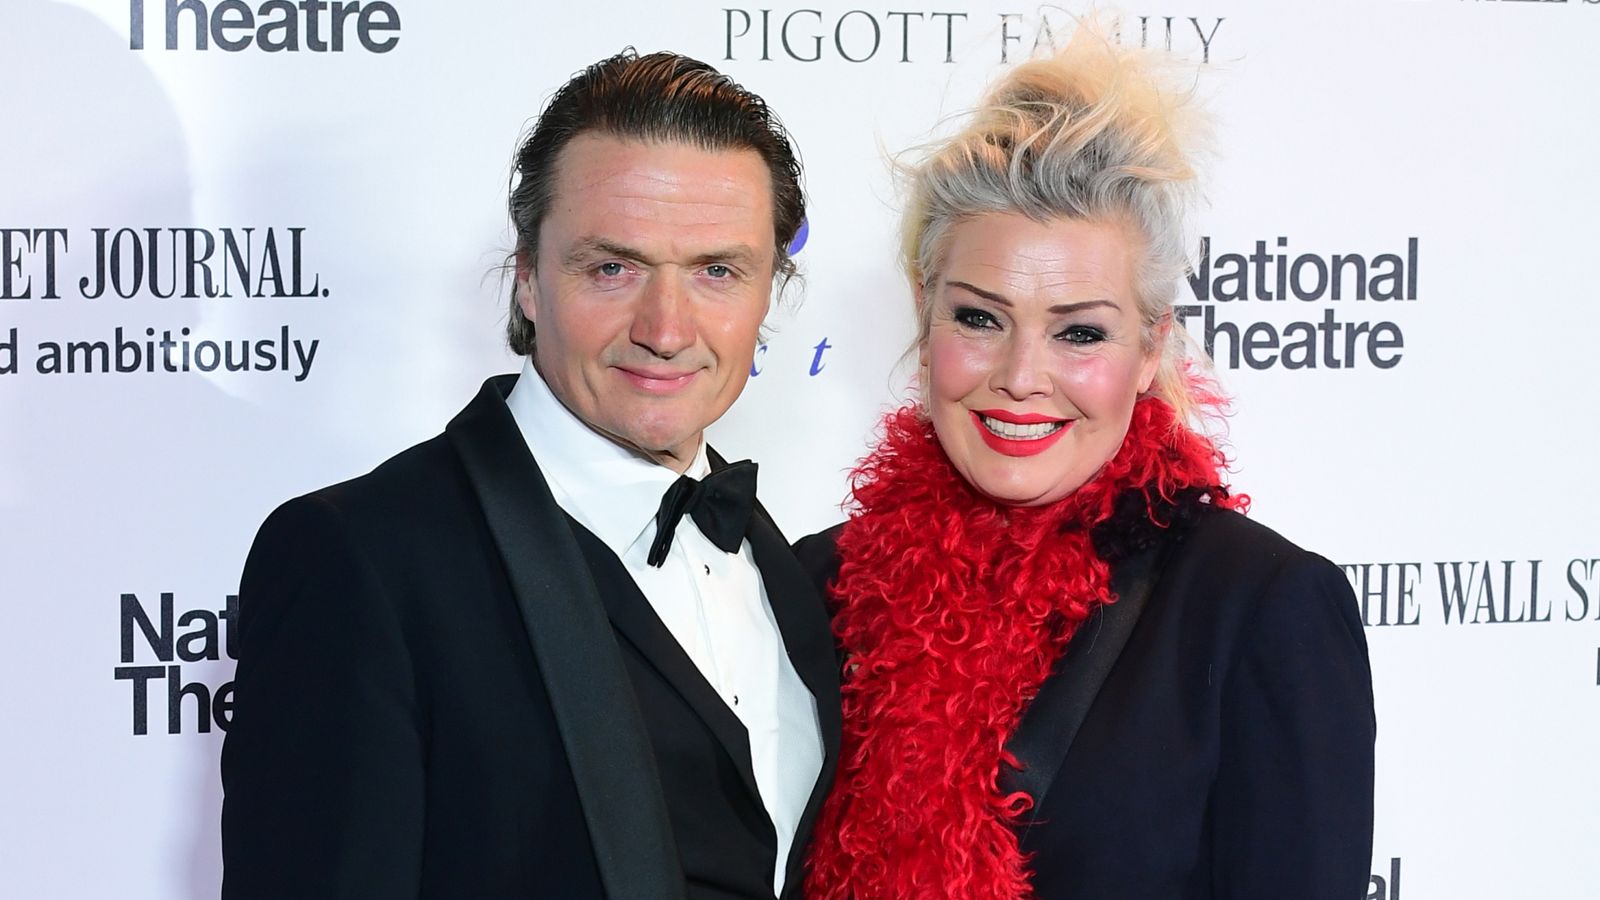 Singer Kim Wilde and actor Hal Fowler announce divorce after more than 25 years of marriage